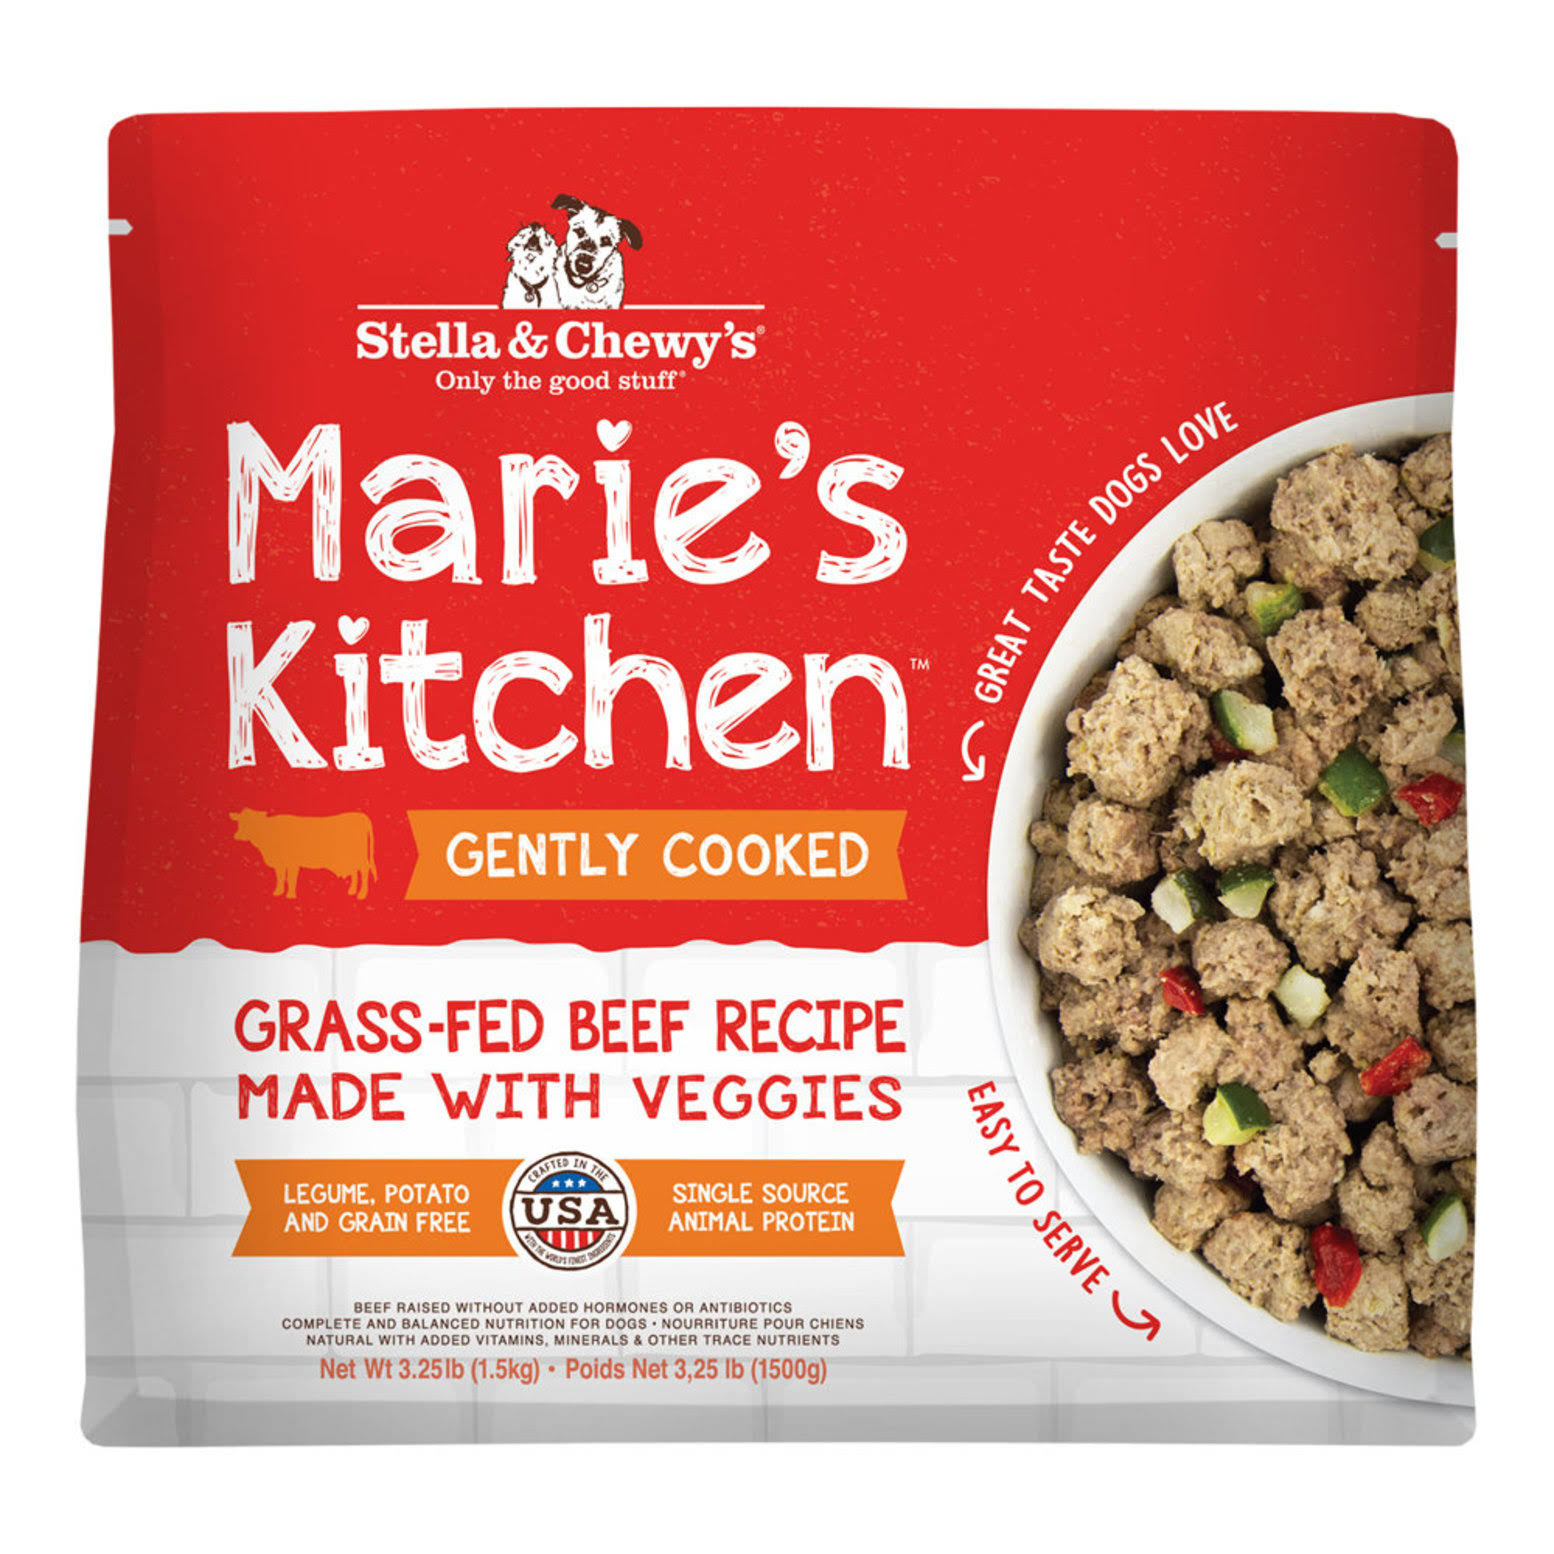 Stella & chewy's Marie's Kitchen Beef Gently Cooked 3.25LB